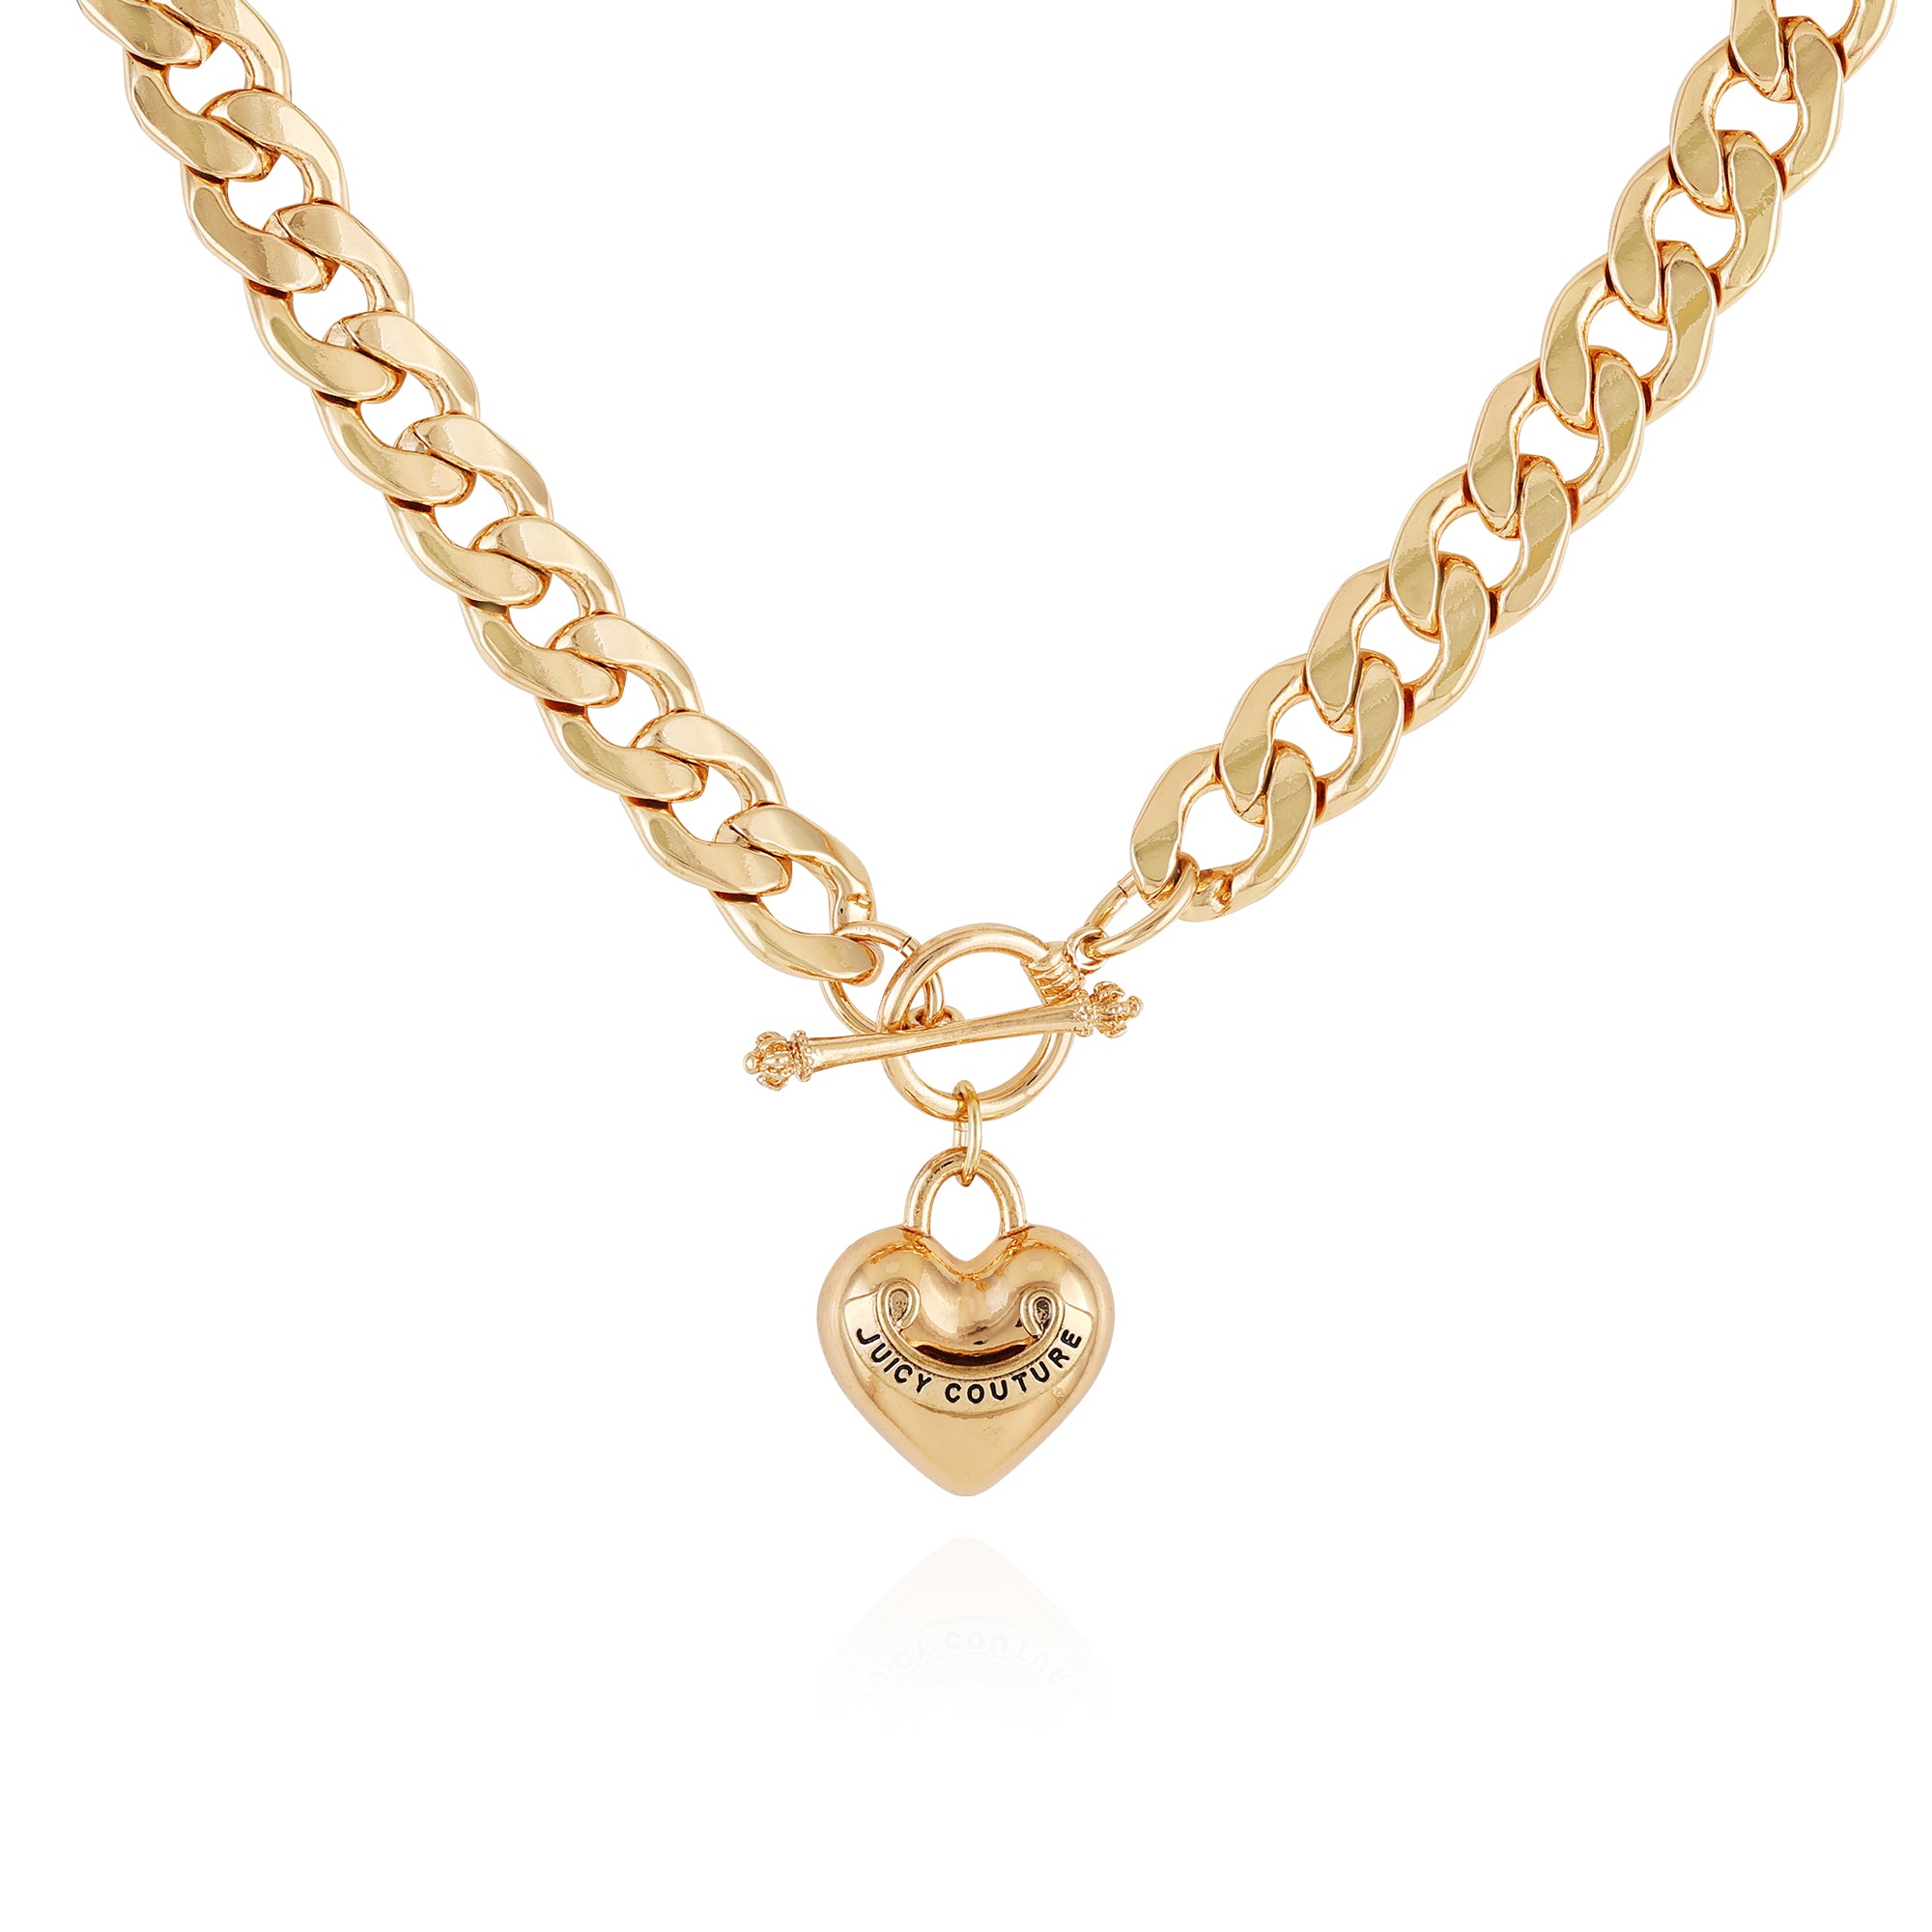 Juicy Couture replenishment Gold Puffed Heart Necklace in Metallic